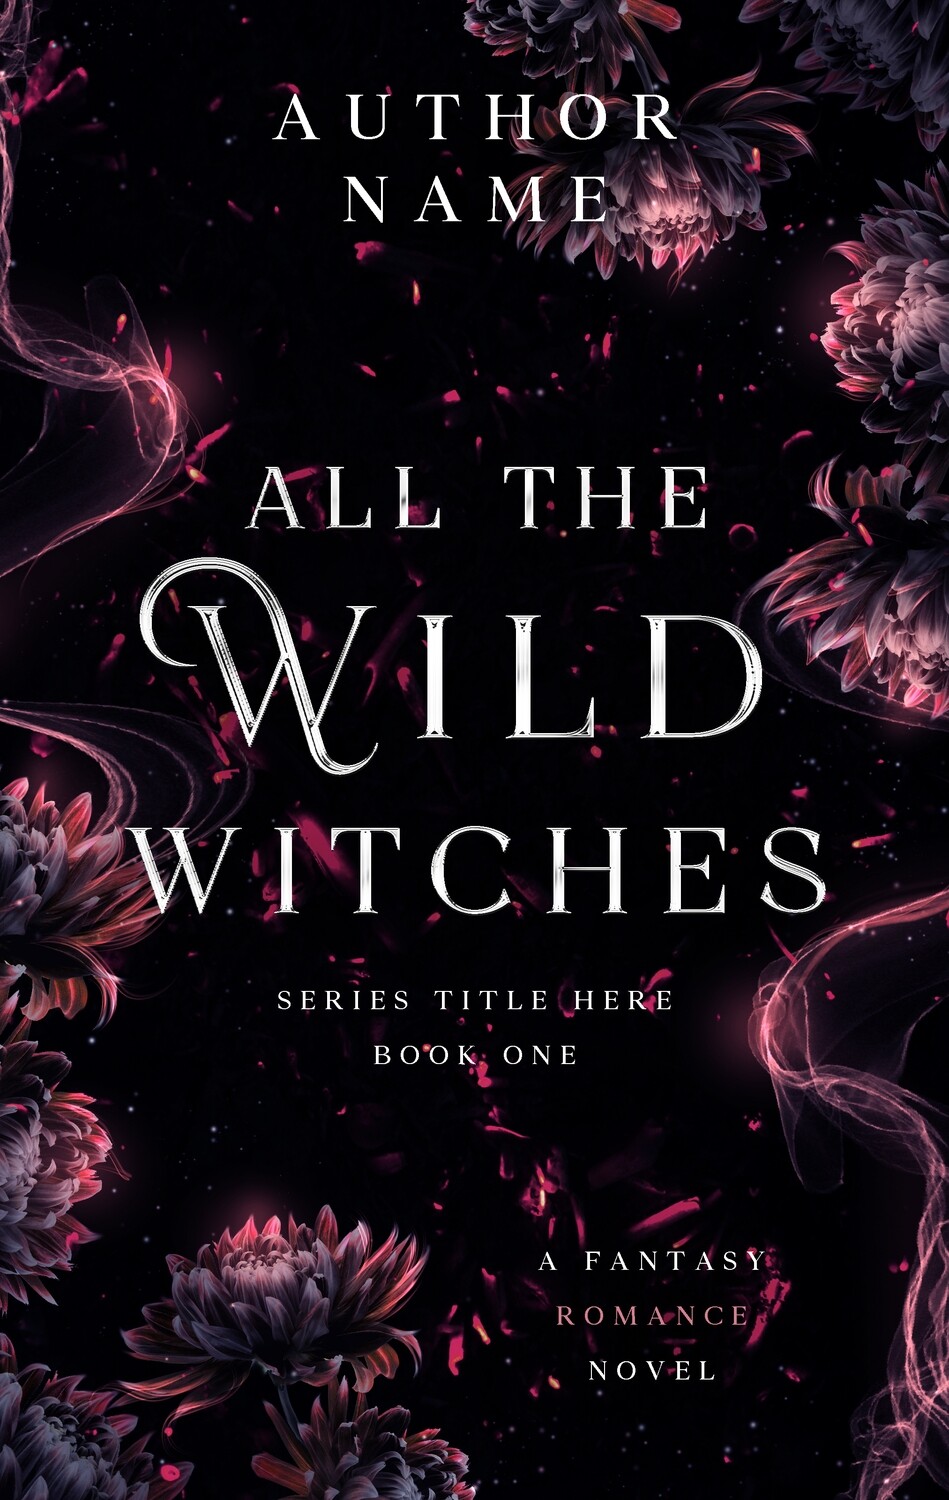 ALL THE WILD WITCHES